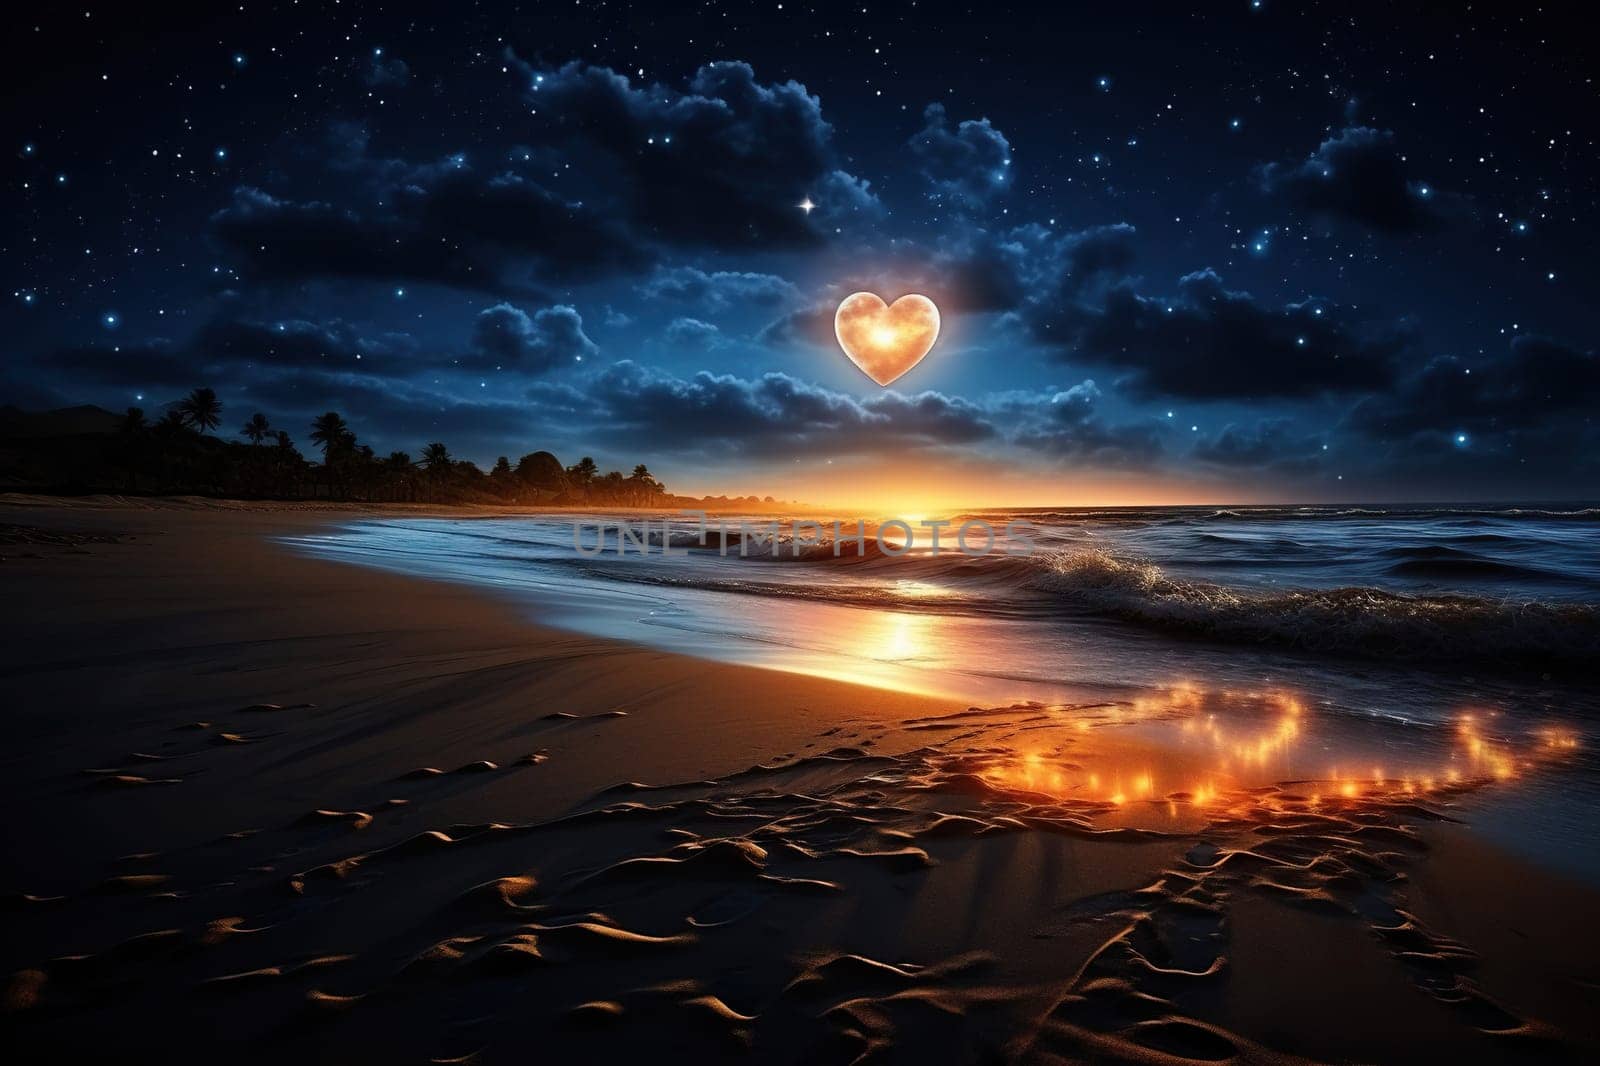 Night seascape with a glowing heart in the cloudy sky. Romantic composition.